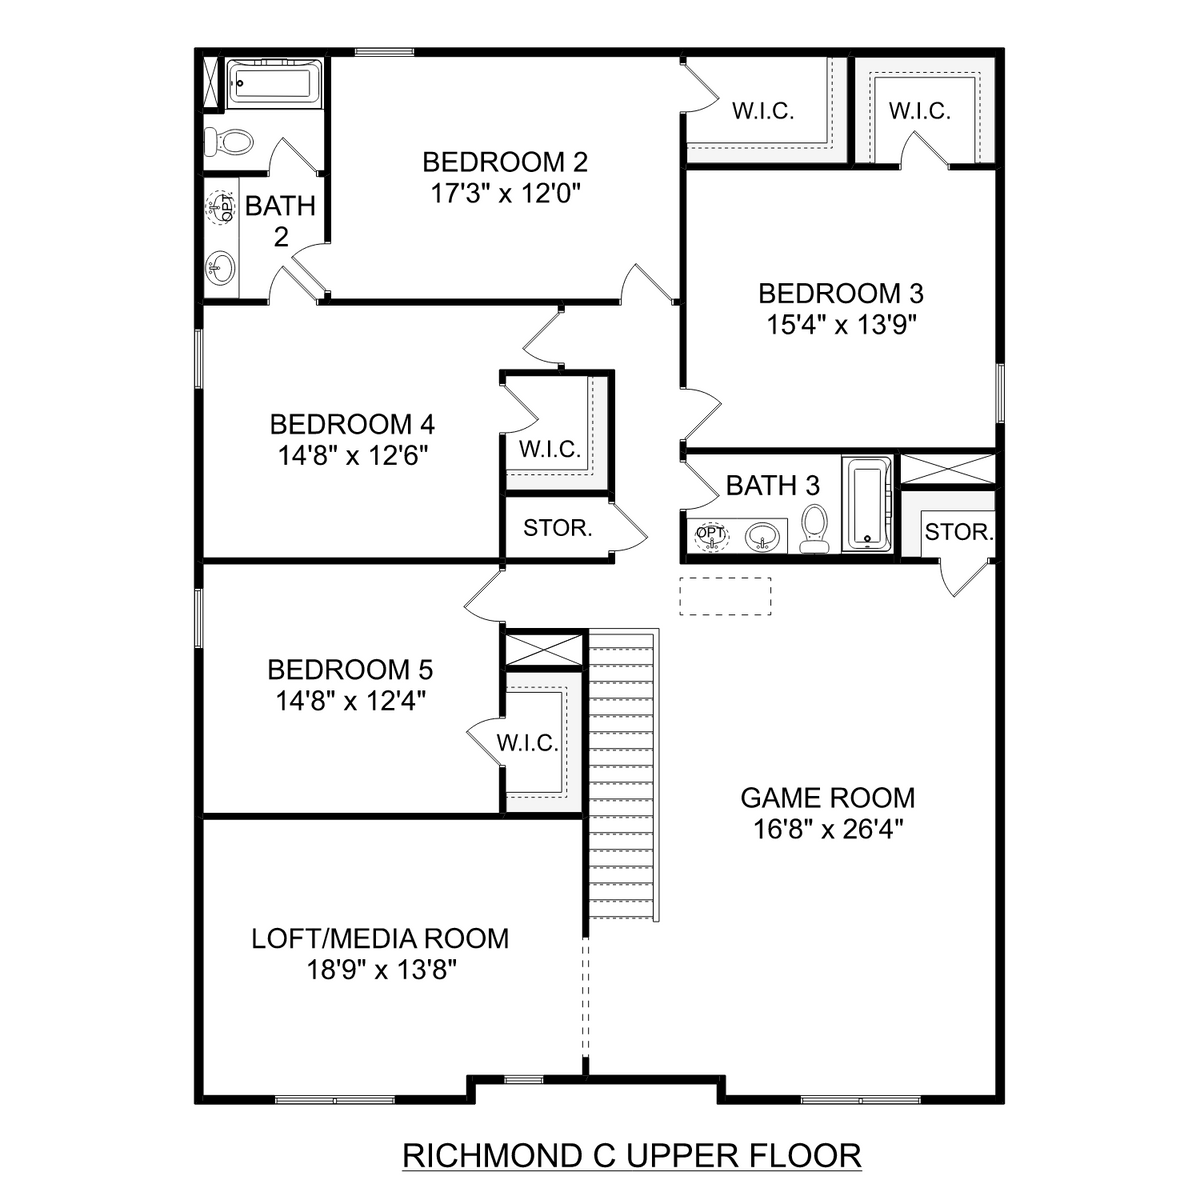 2 - The Richmond C floor plan layout for 150 Cherry Laurel Drive in Davidson Homes' Clearview community.